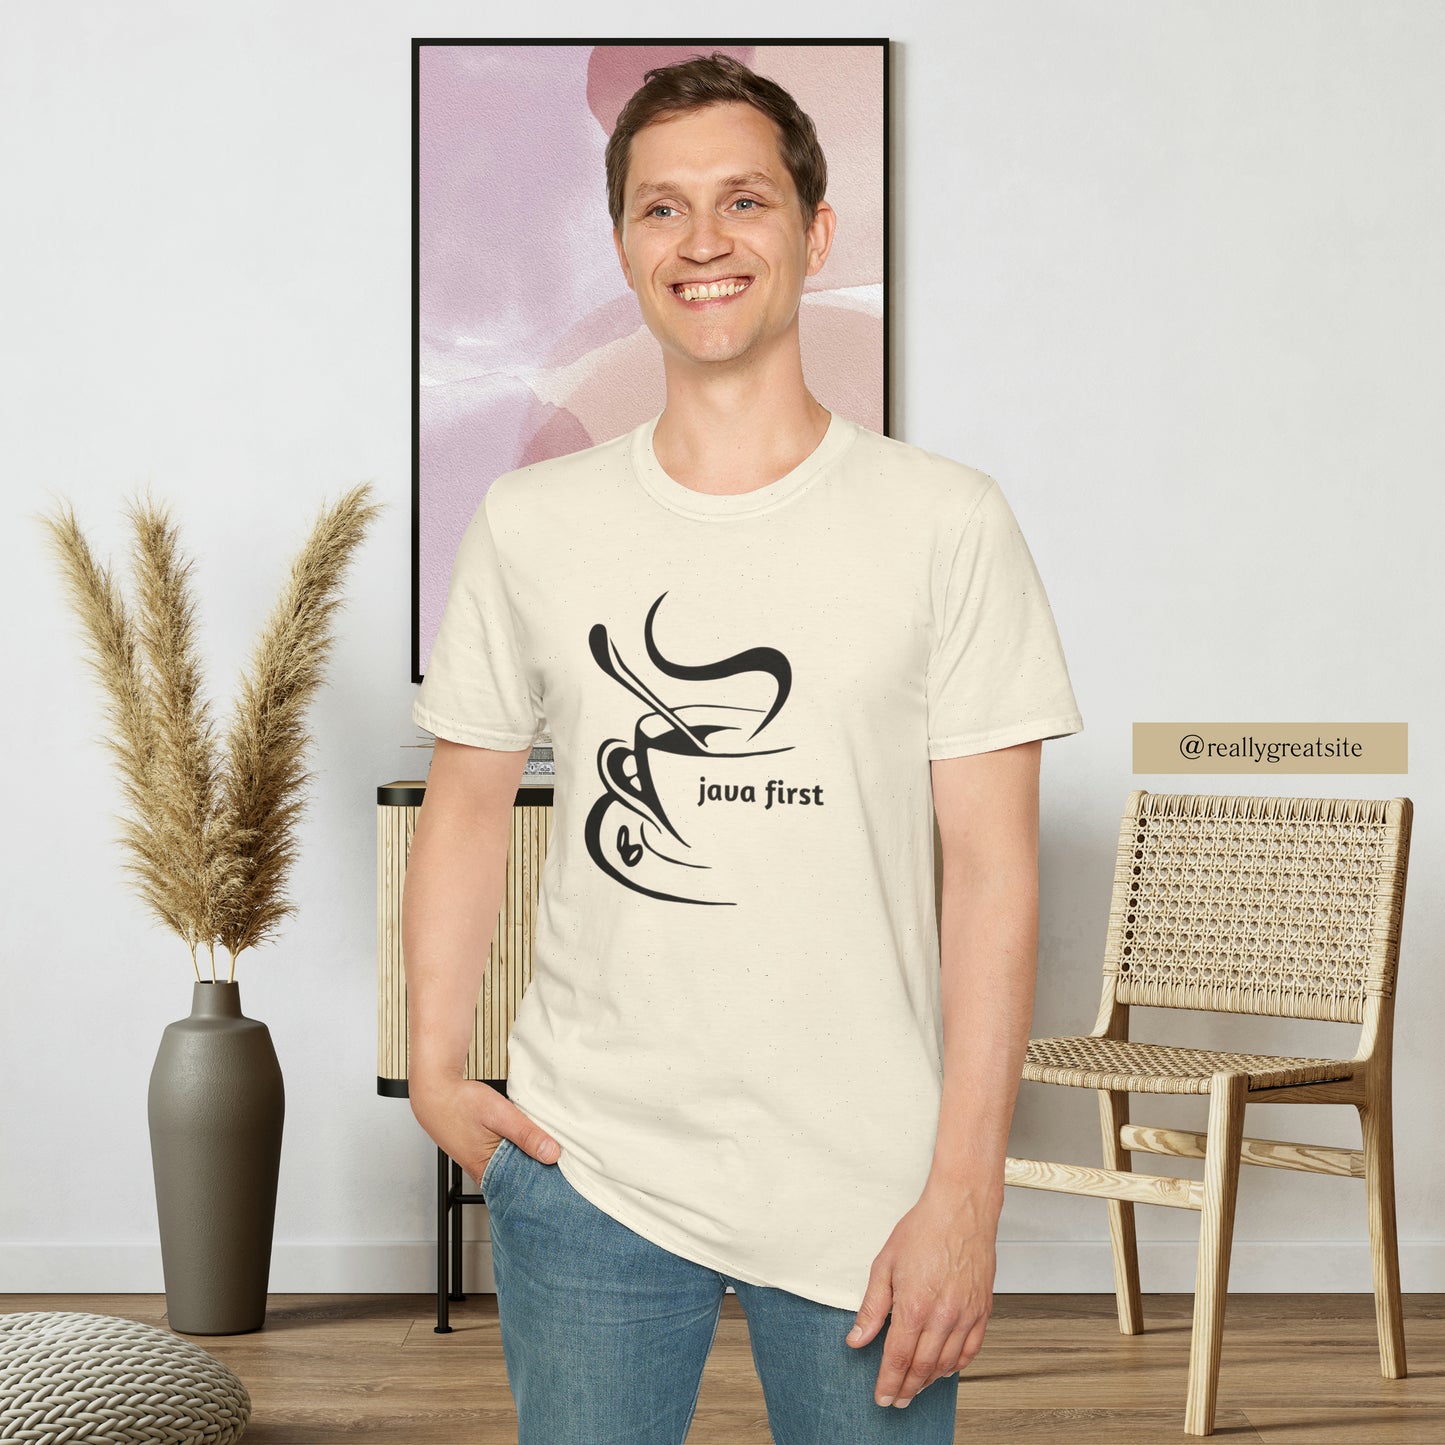 A simple and elegant design for that “java first” on this Unisex Softstyle T-Shirt design.